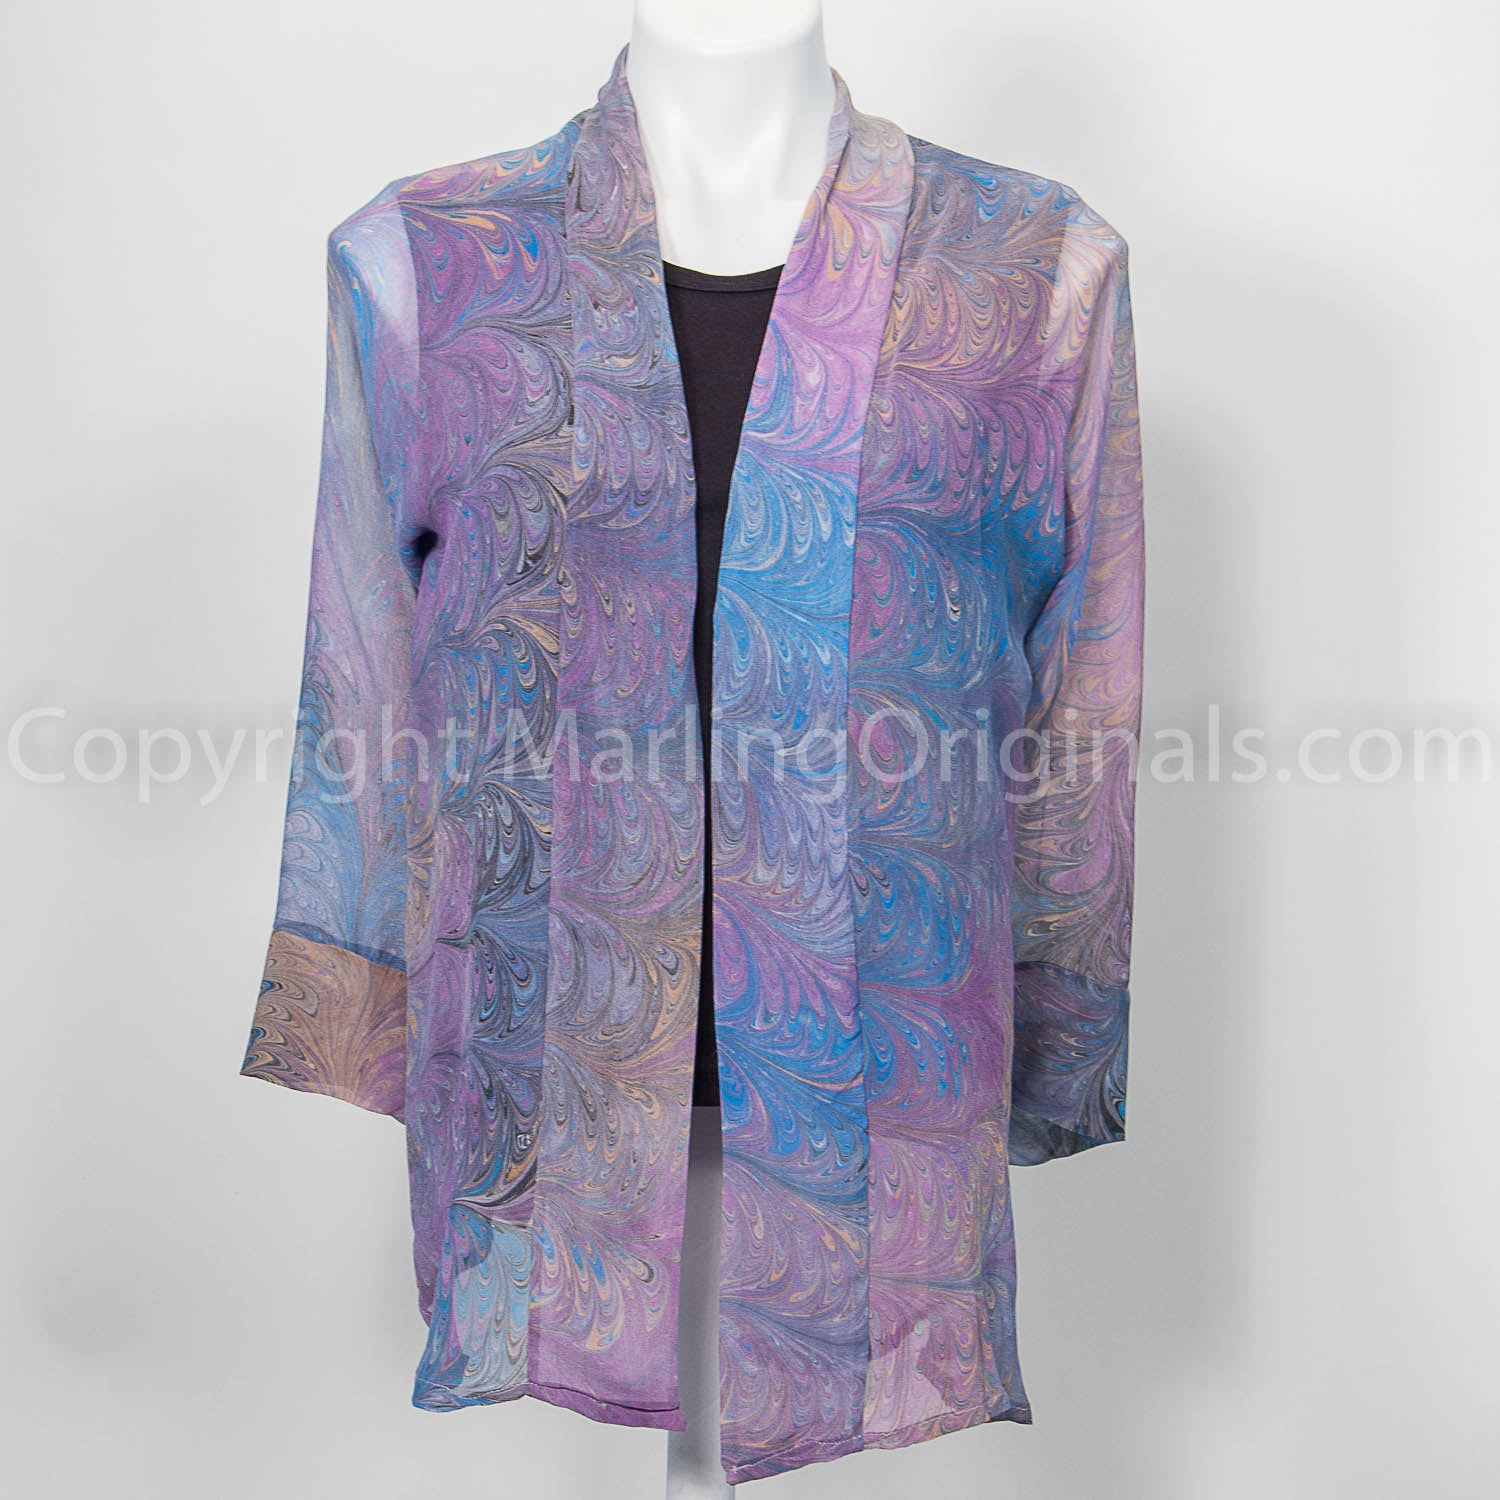 hand marbled sheer chiffon jacket, feathered pattern in lavender, soft blue and peach